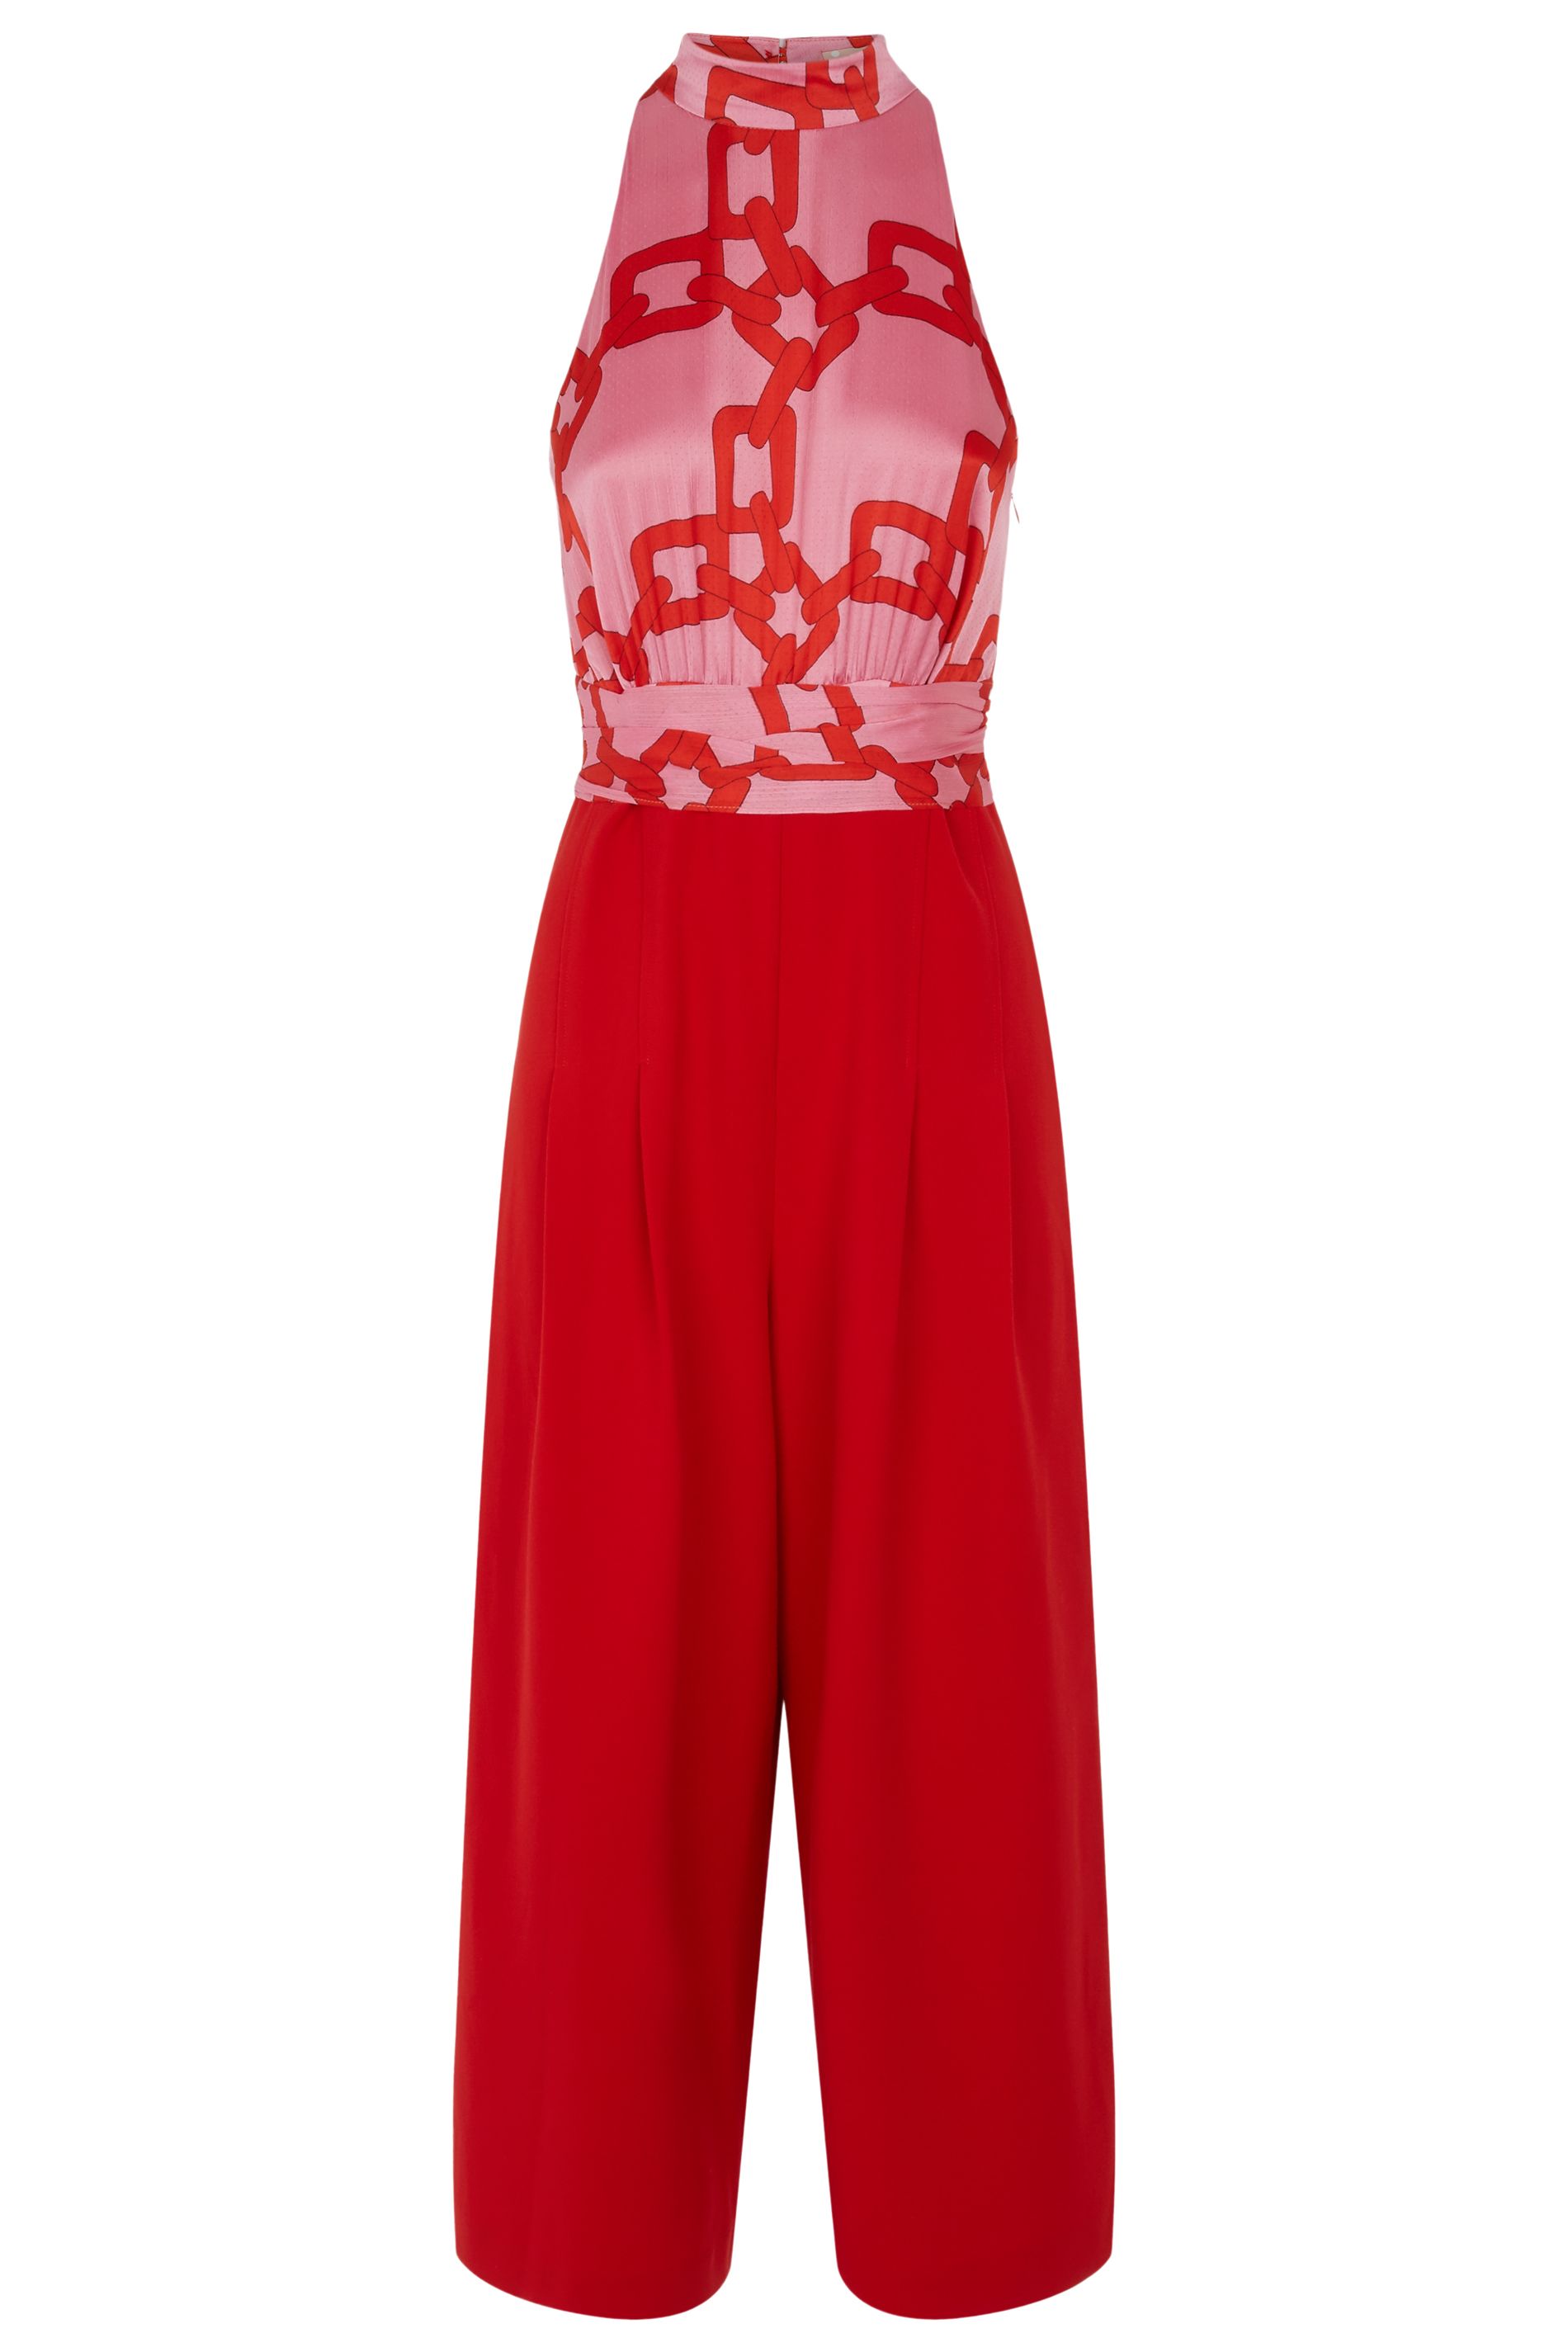 Our new take on the classic jumpsuit, the Divided Jumpsuit is elegantly tailored to perfectly flatter and accentuate the form. Boasting a structured chain print bodice with a halter-neck, this glamorous style will bring class and sophistication to evening occasions.  100% Polyester, Trouser 50% Cotton 40% Nylon 10% Elastane. Machine Wash at 30c